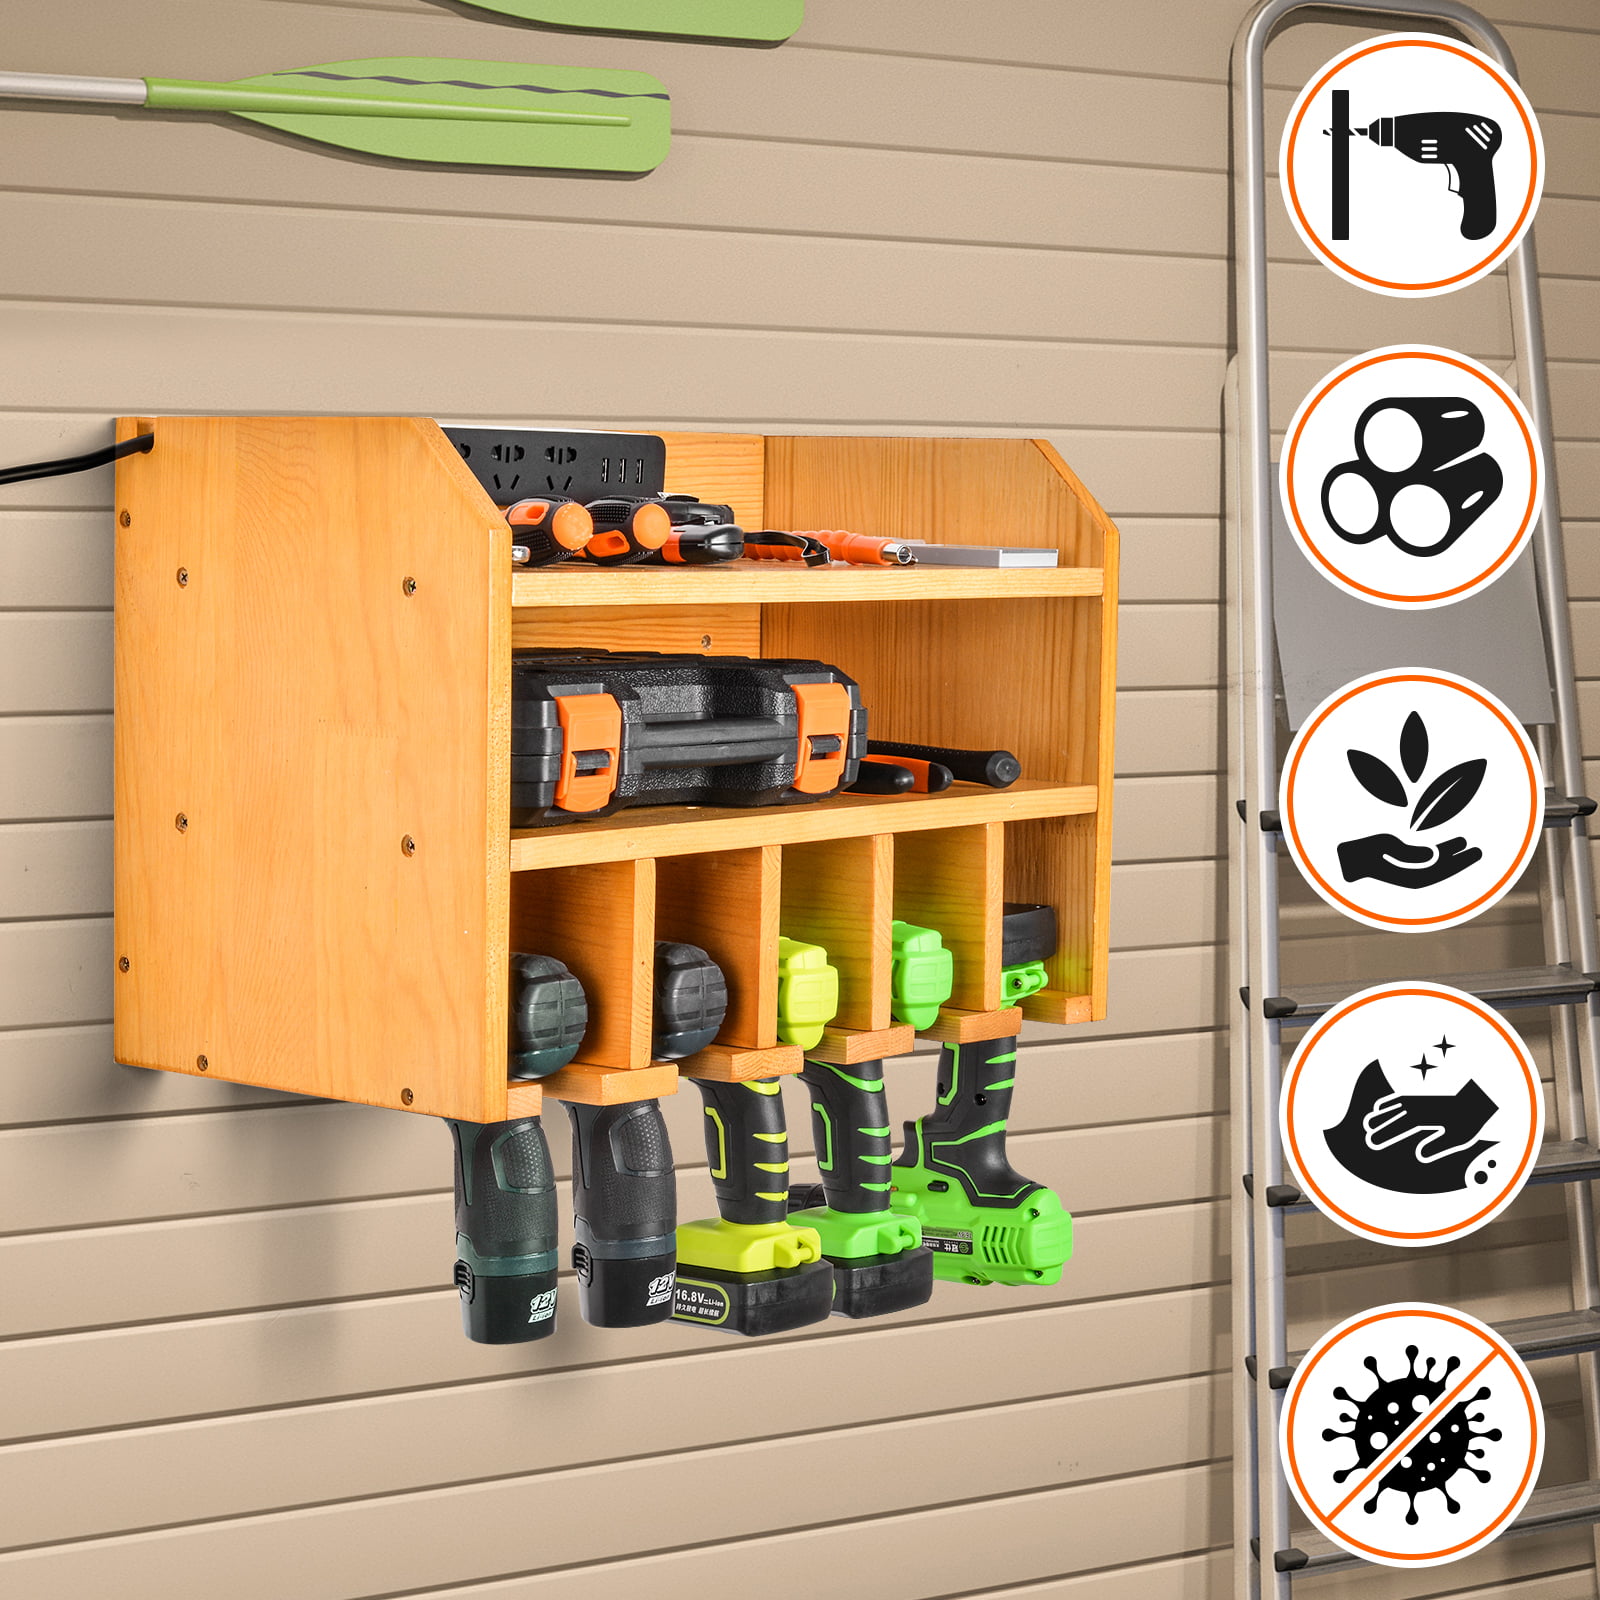  TICONN Heavy Duty Tool Organizer Rack, Garage Wall Mounted  Electric Drill Storage Rack with Charger Shelf with 100lbs Weight Limit  (Basic Side tool Strips) : Tools & Home Improvement